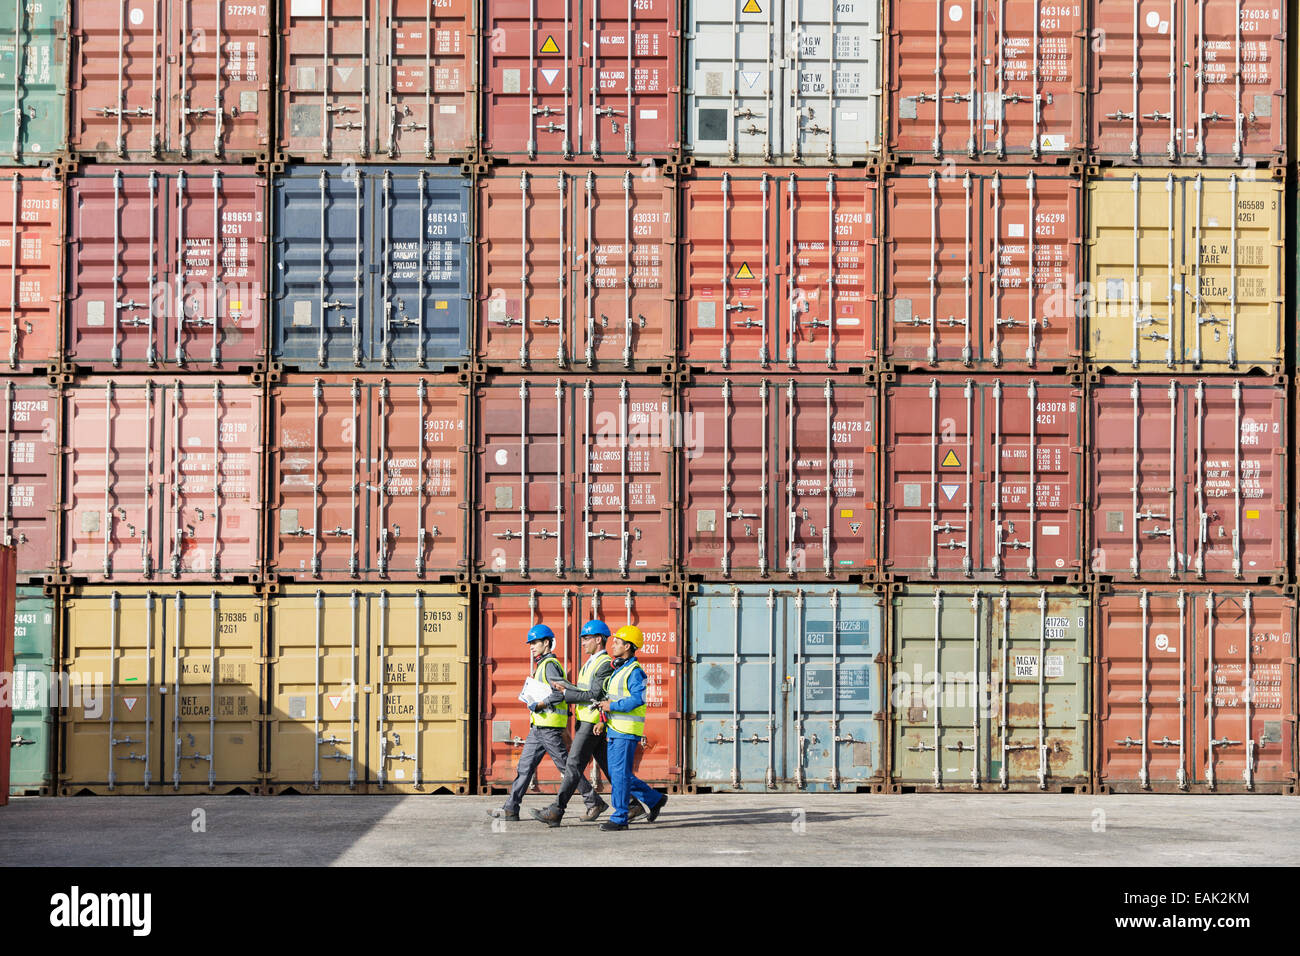 Workers walking together near stack of cargo containers Stock Photo